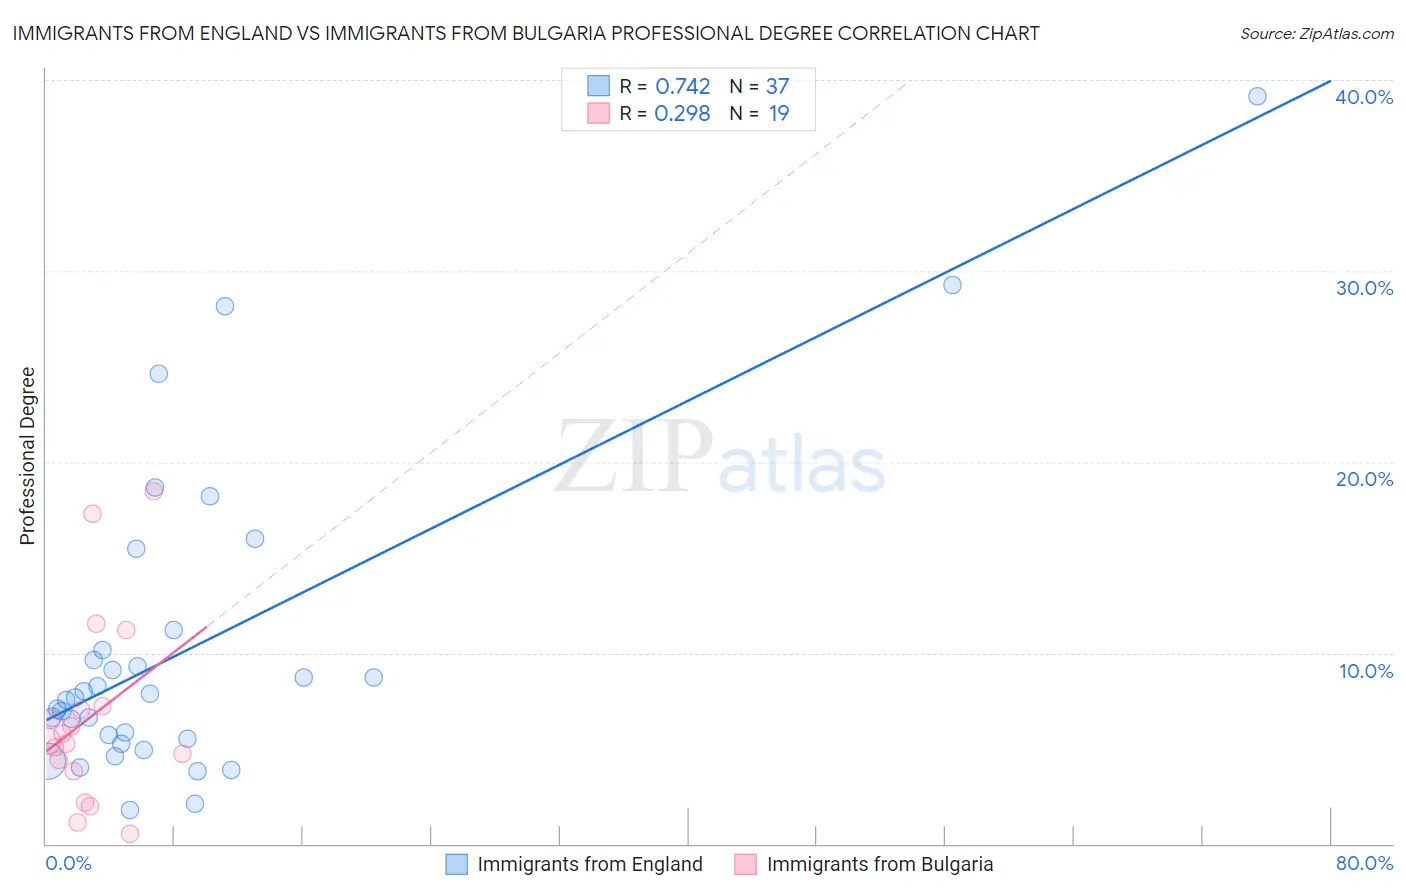 Immigrants from England vs Immigrants from Bulgaria Professional Degree